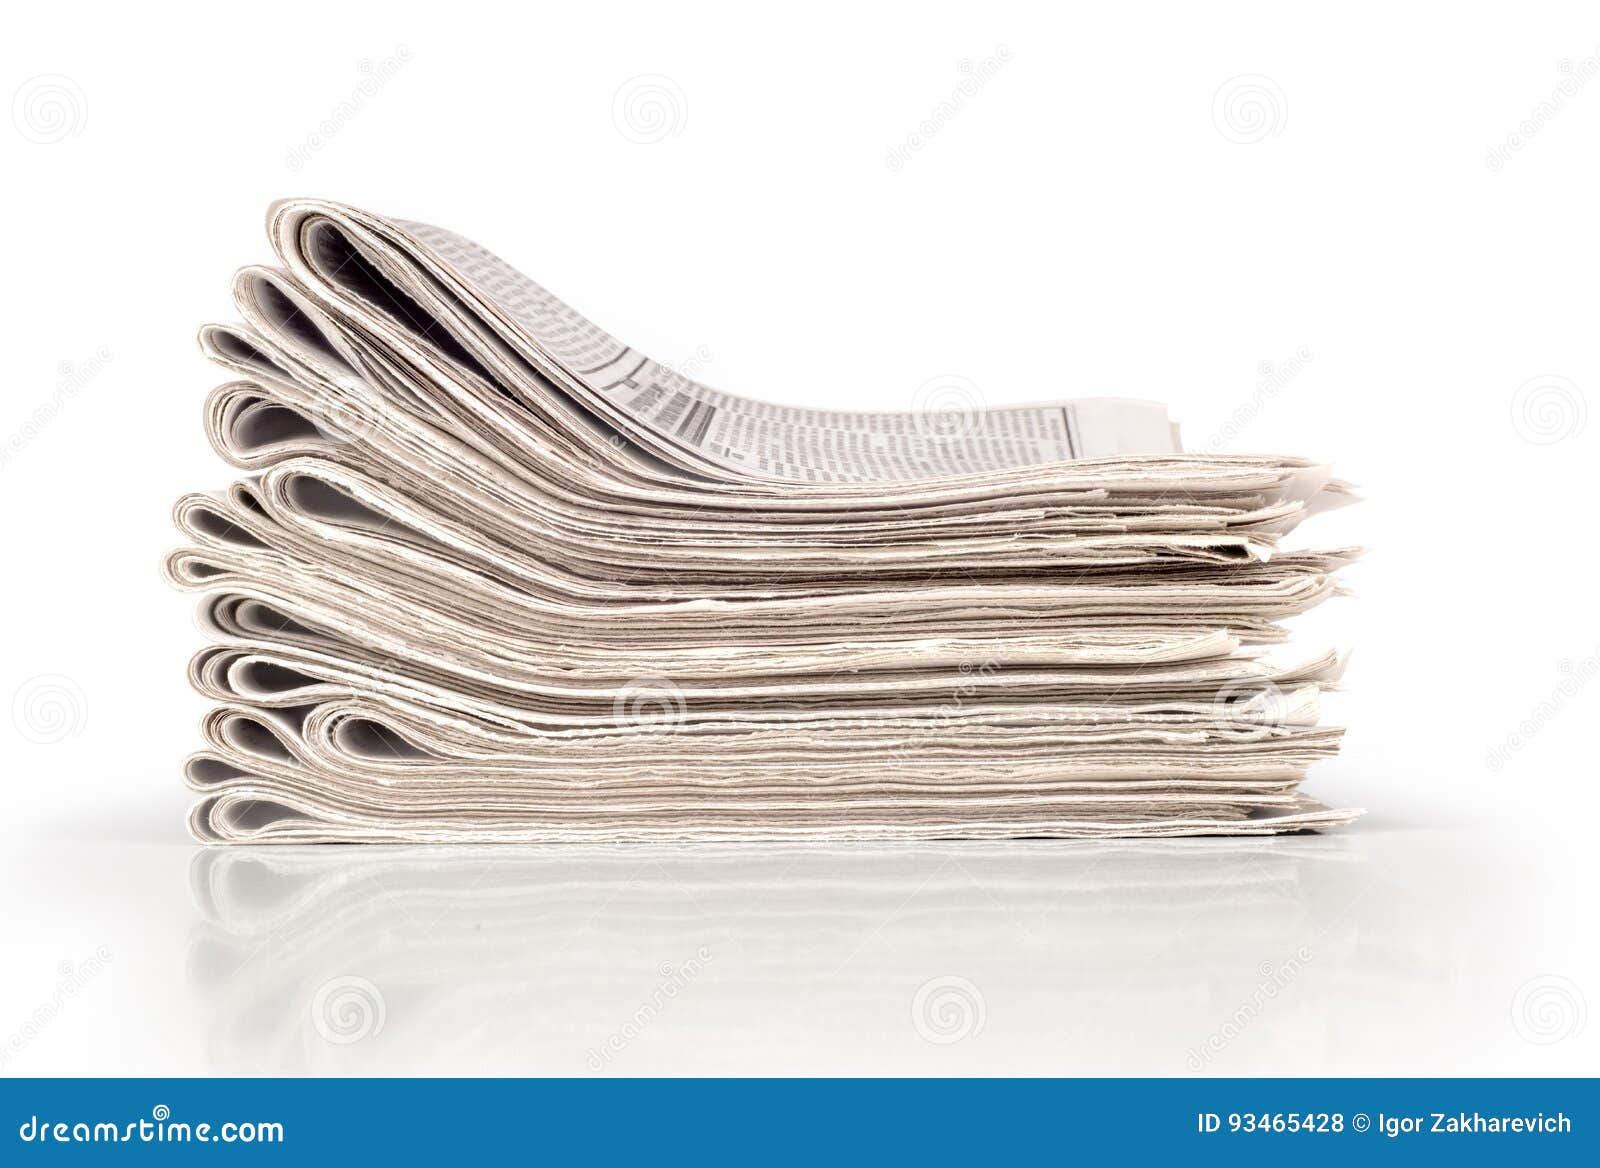 a pile of newspapers